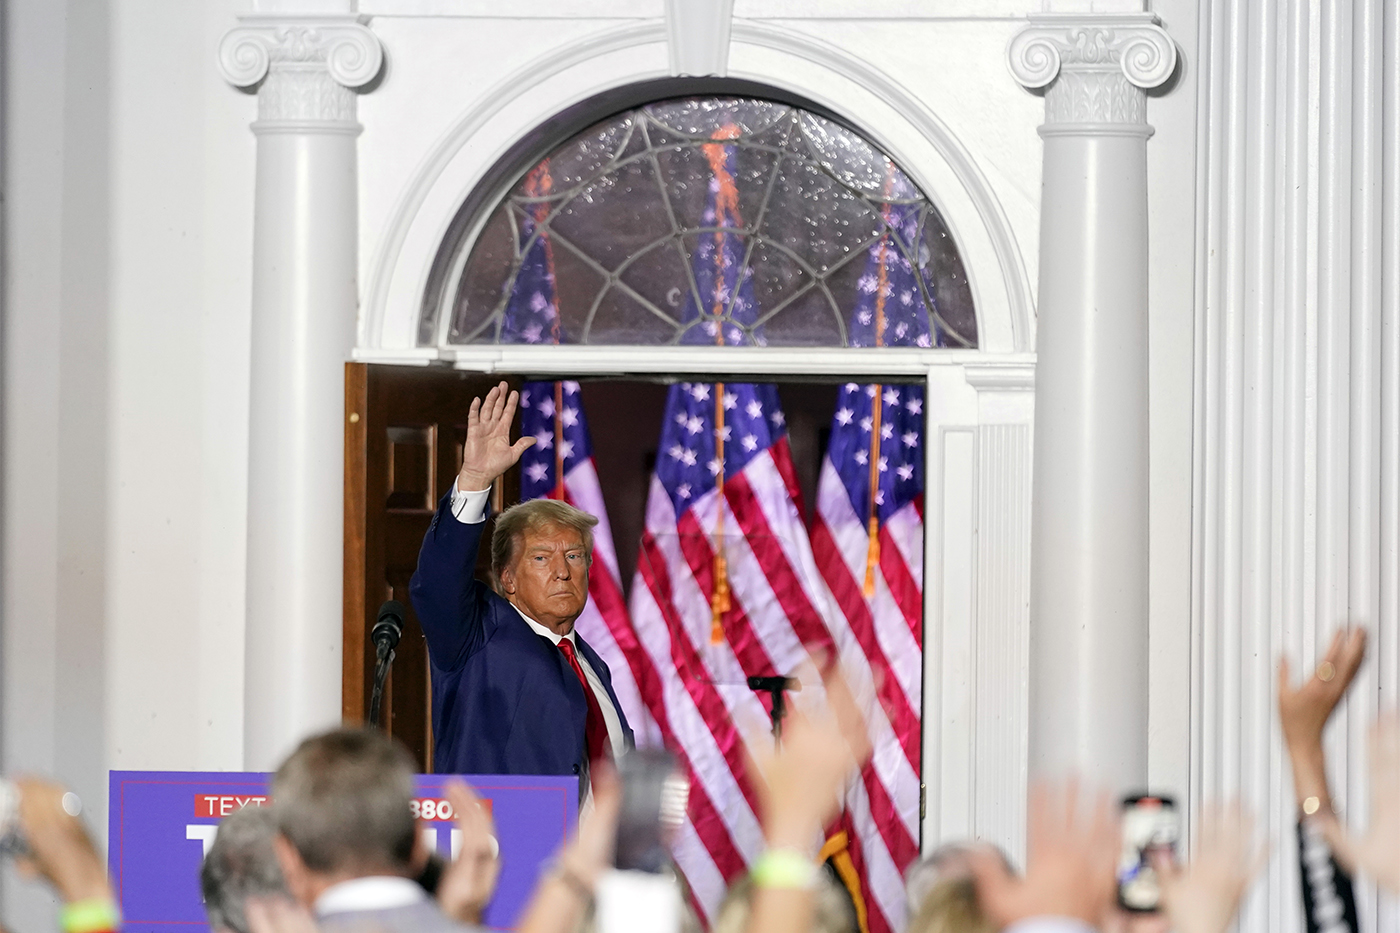 Donald Trump waving to a crowd of supporters